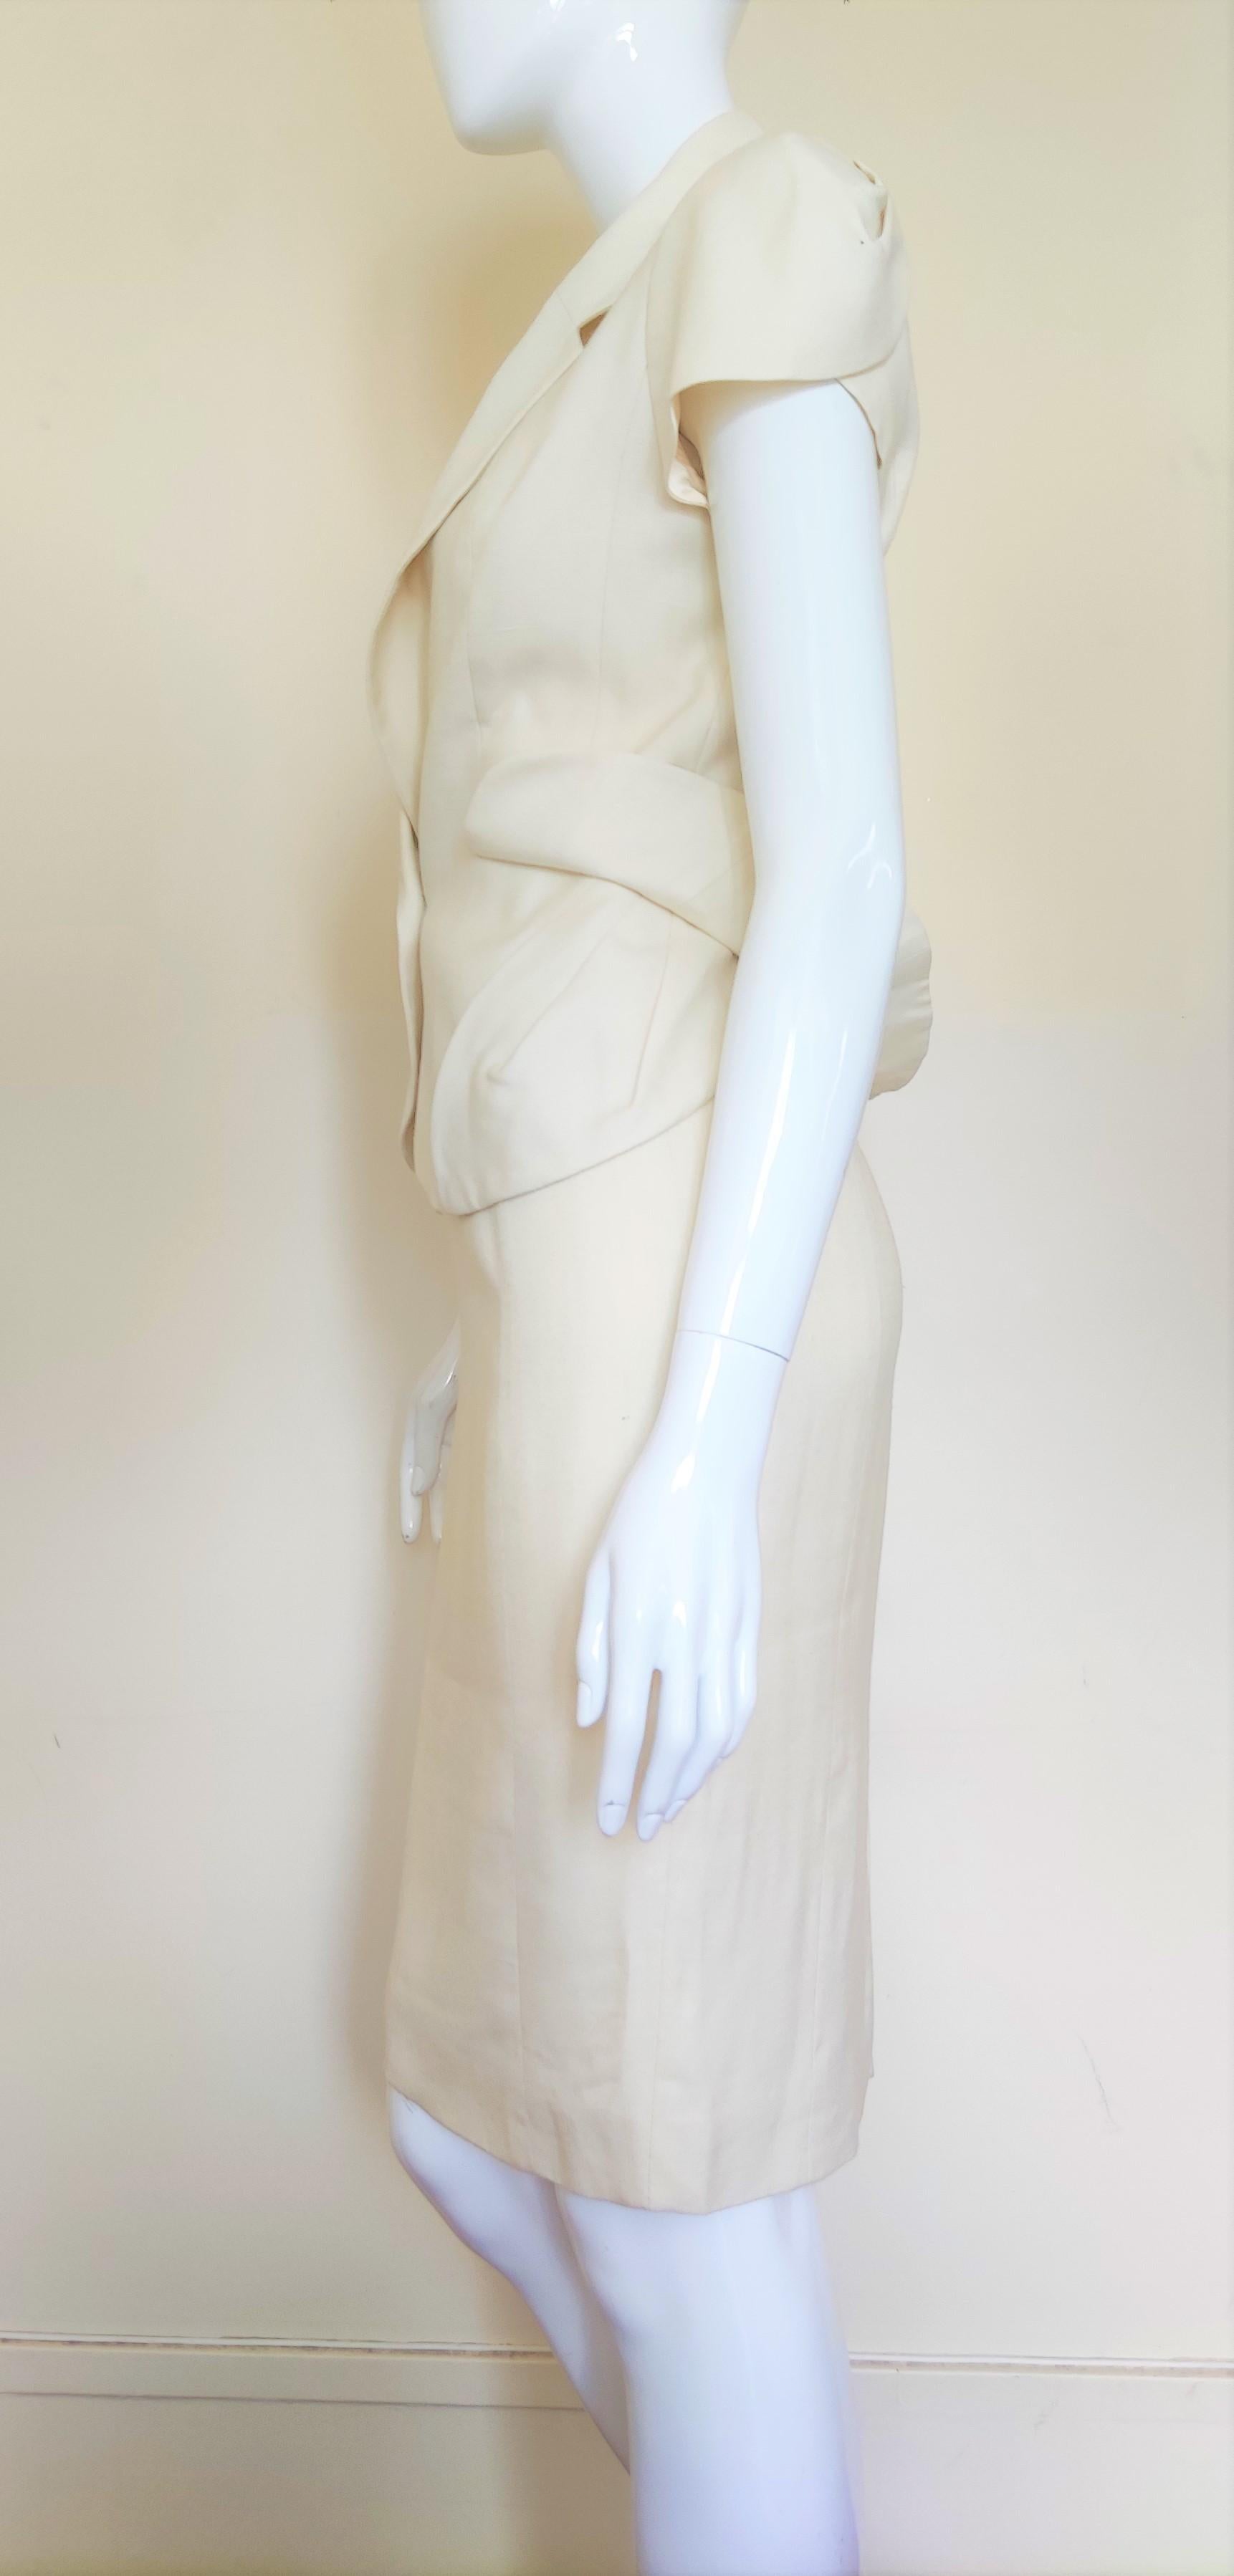 Early John Galliano S/S 1999 Runway Vintage Ivory Ensemble Dress Costume Suit For Sale 6